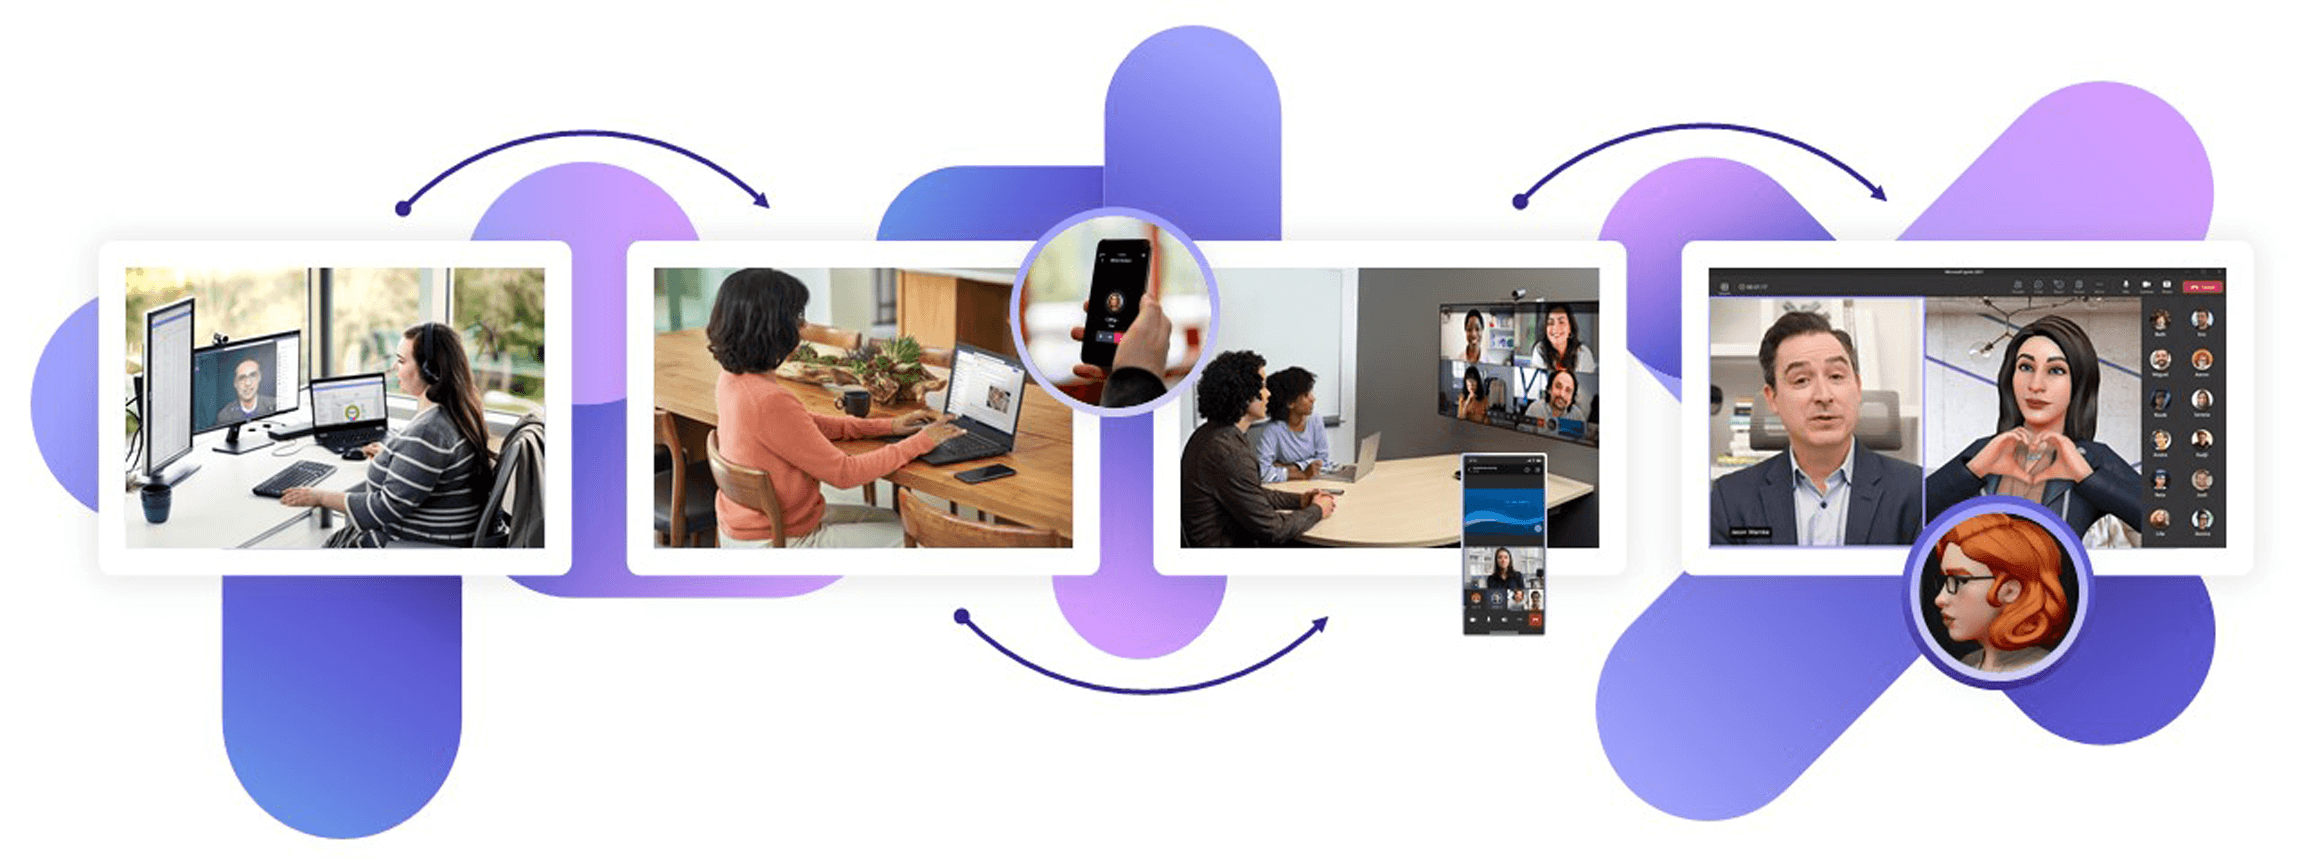 New Microsoft Teams: The Future of Workplace Communication